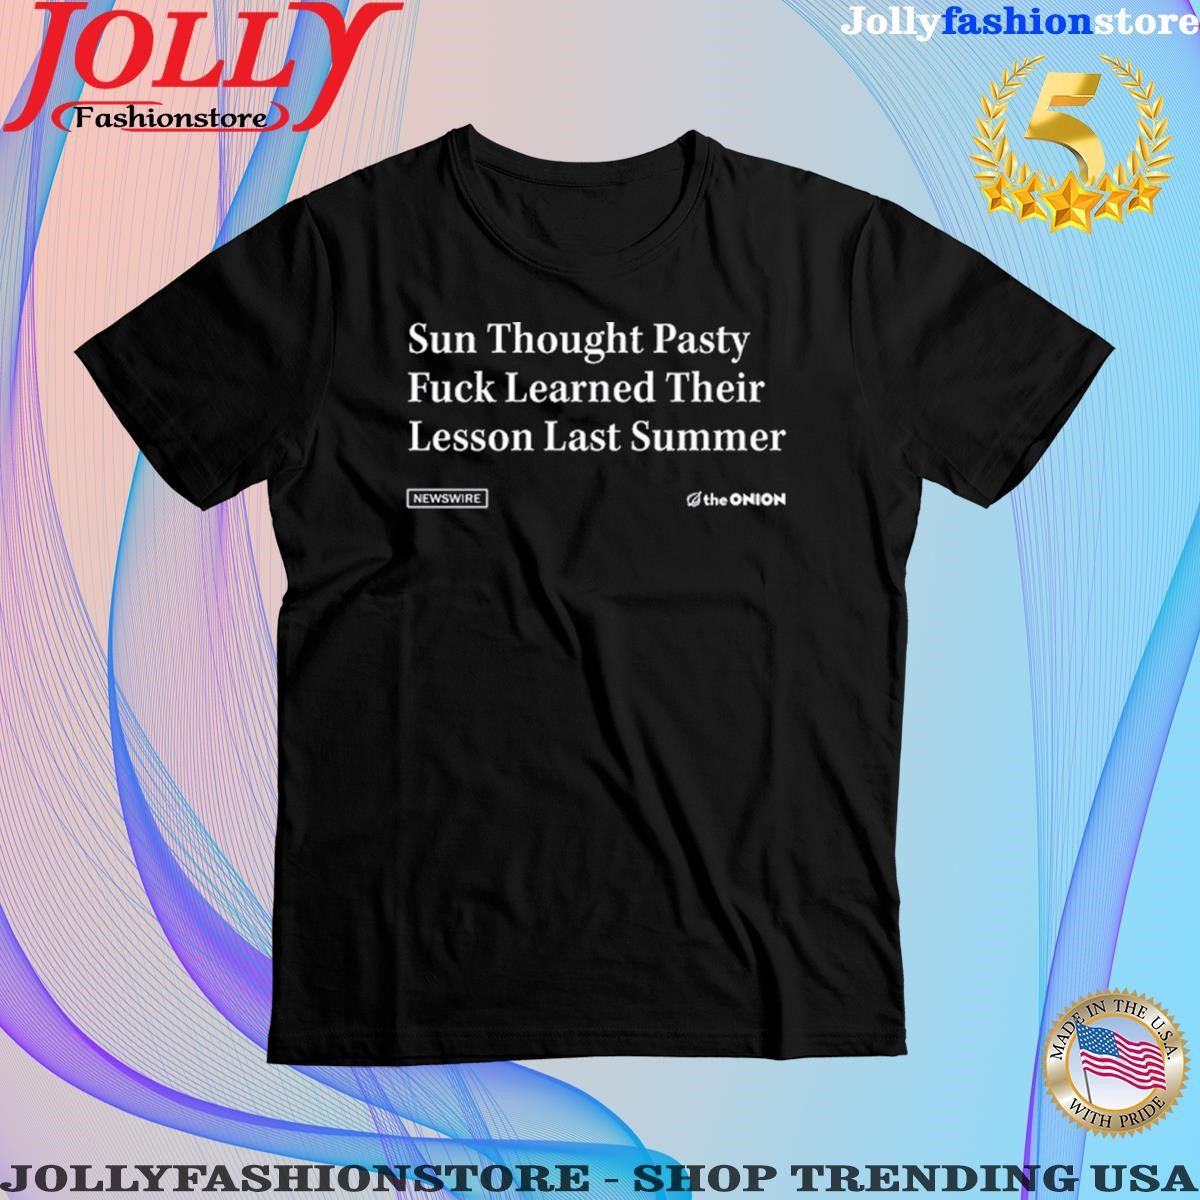 Trending sun Thought Pasty Fuck Learned Their Lesson Last Summer Shirt